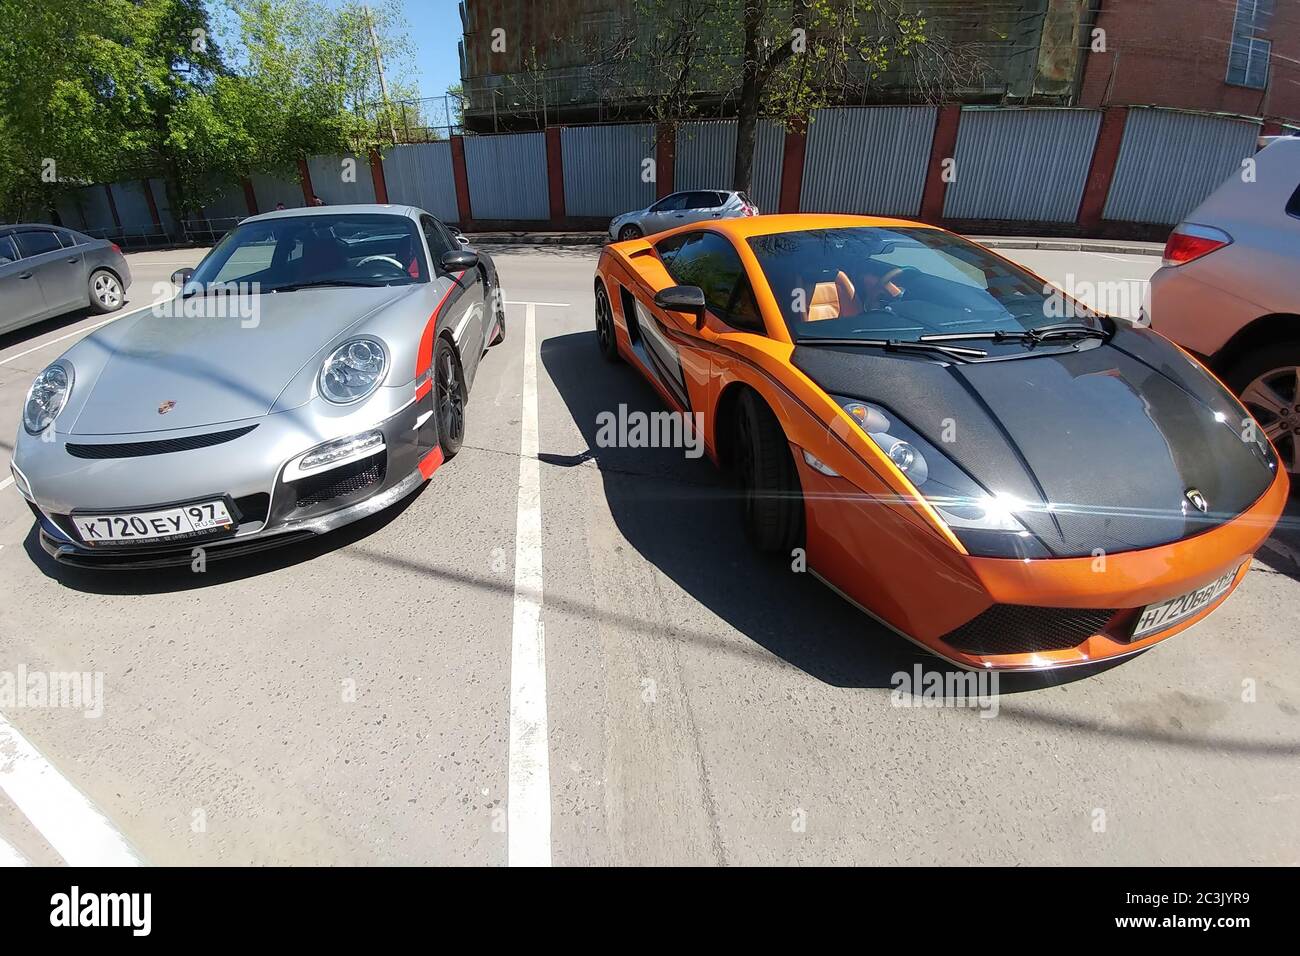 Moscow, Russia - April 14, 2019: Porsche 911 with aerography and Mansory tuning near bright orange Lamborghini Gallardo with carbon hood and other parts parked on the street Stock Photo